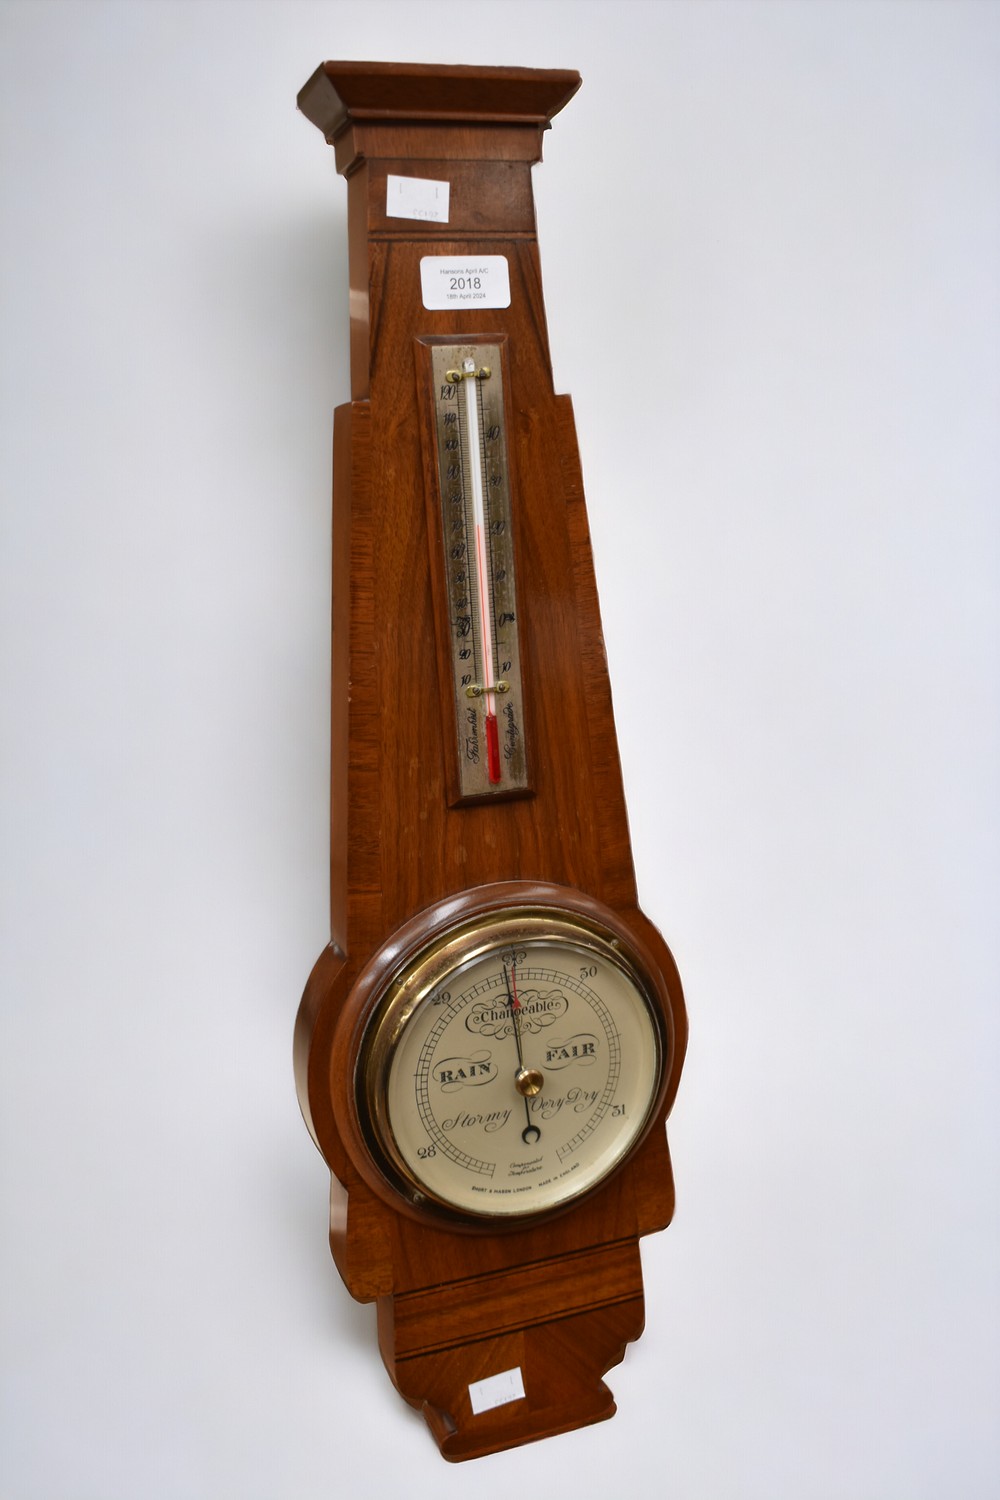 A barometer in the Art Deco style by Short & Mason, London.